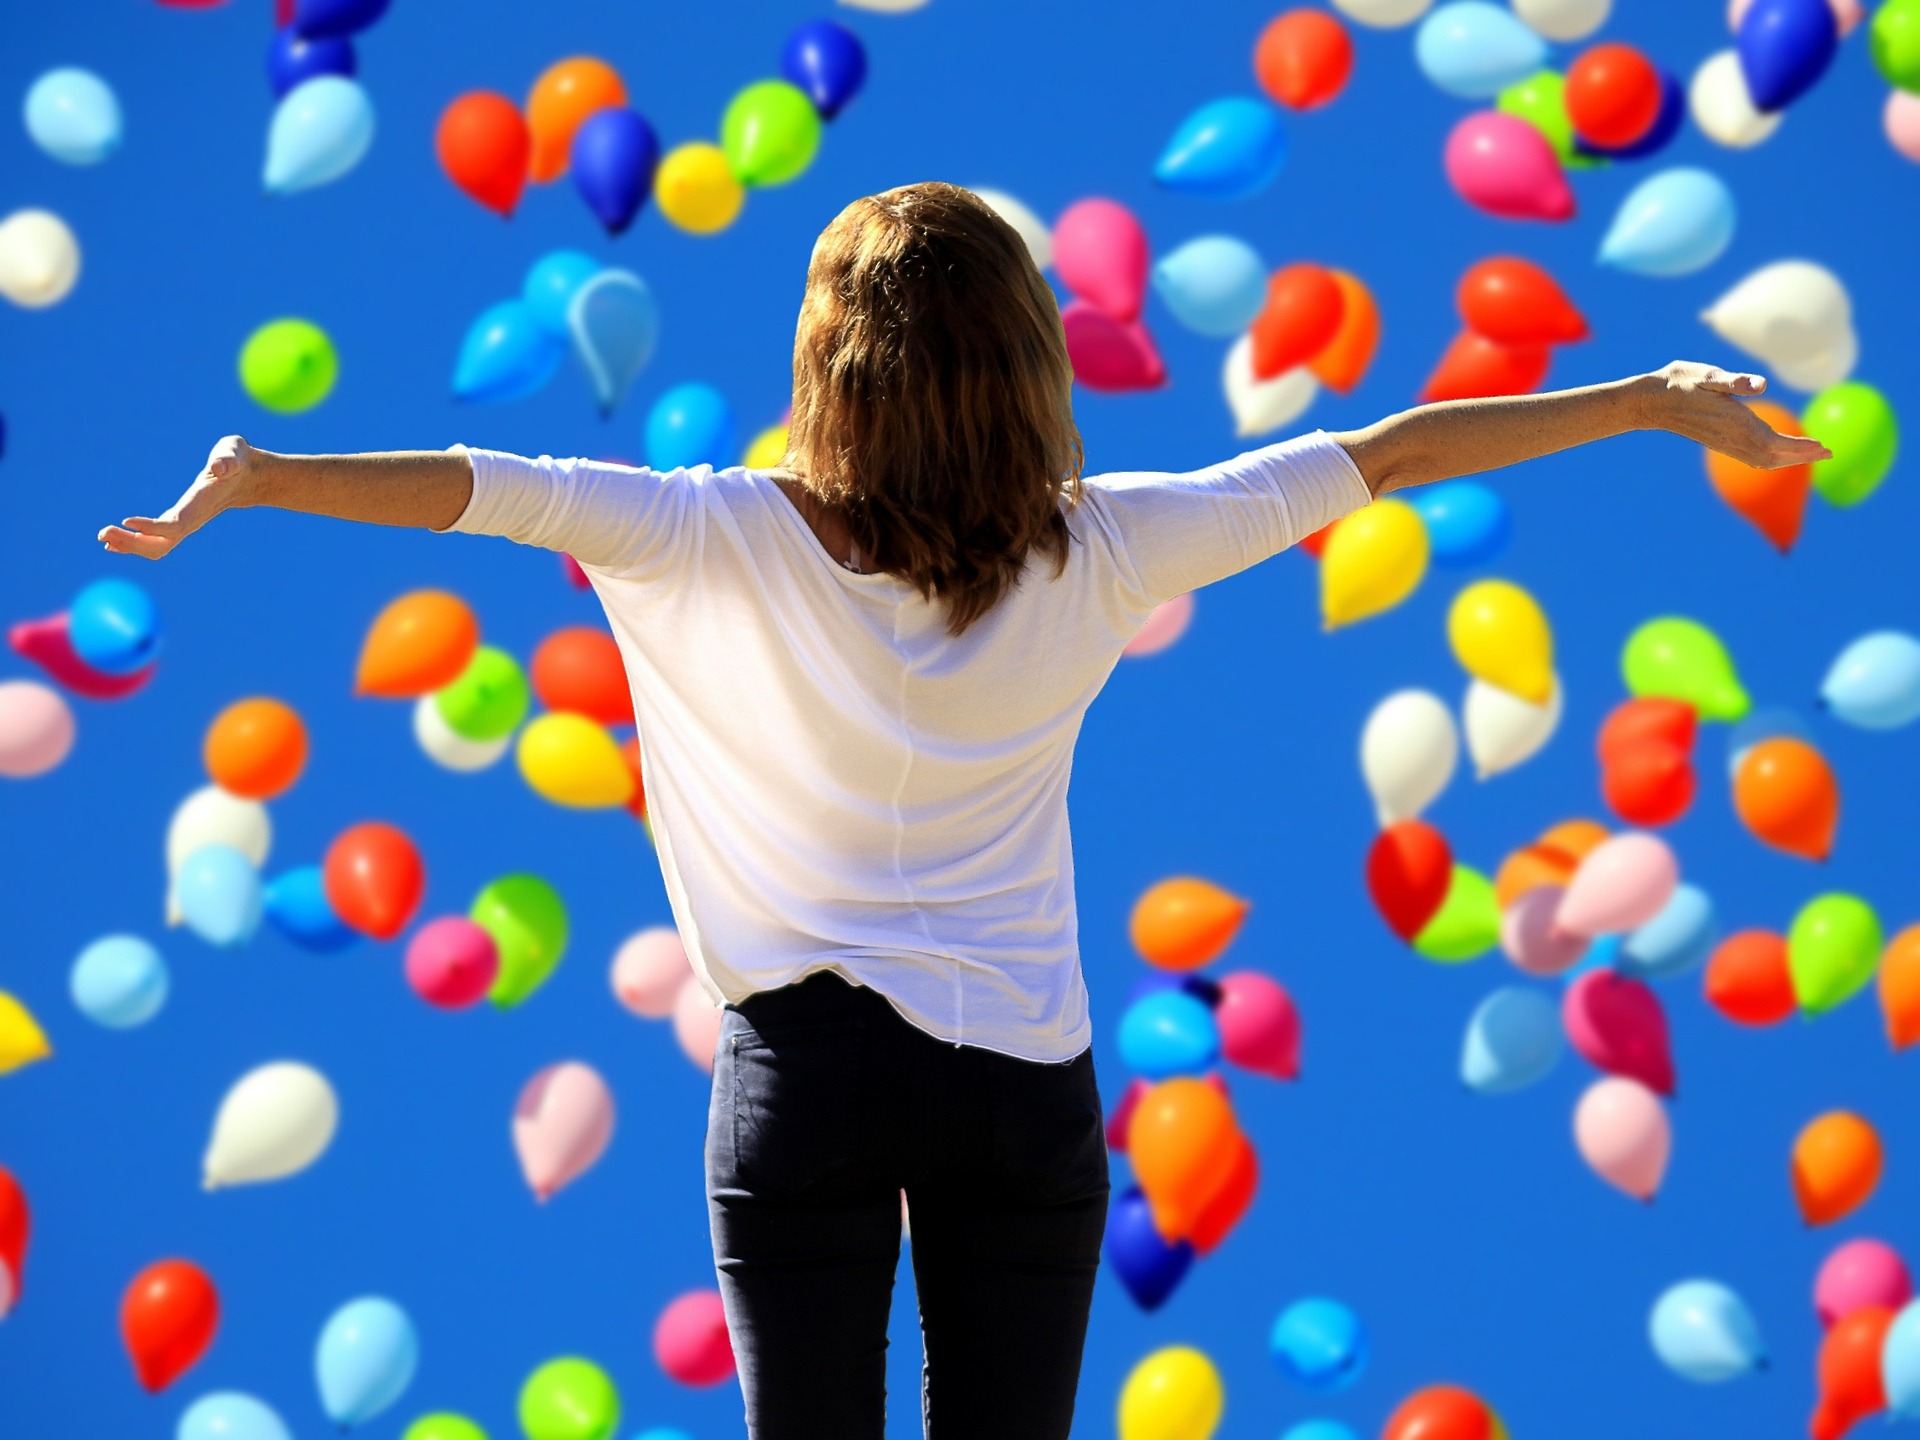 Woman with outstretched arms looking at falling balloons